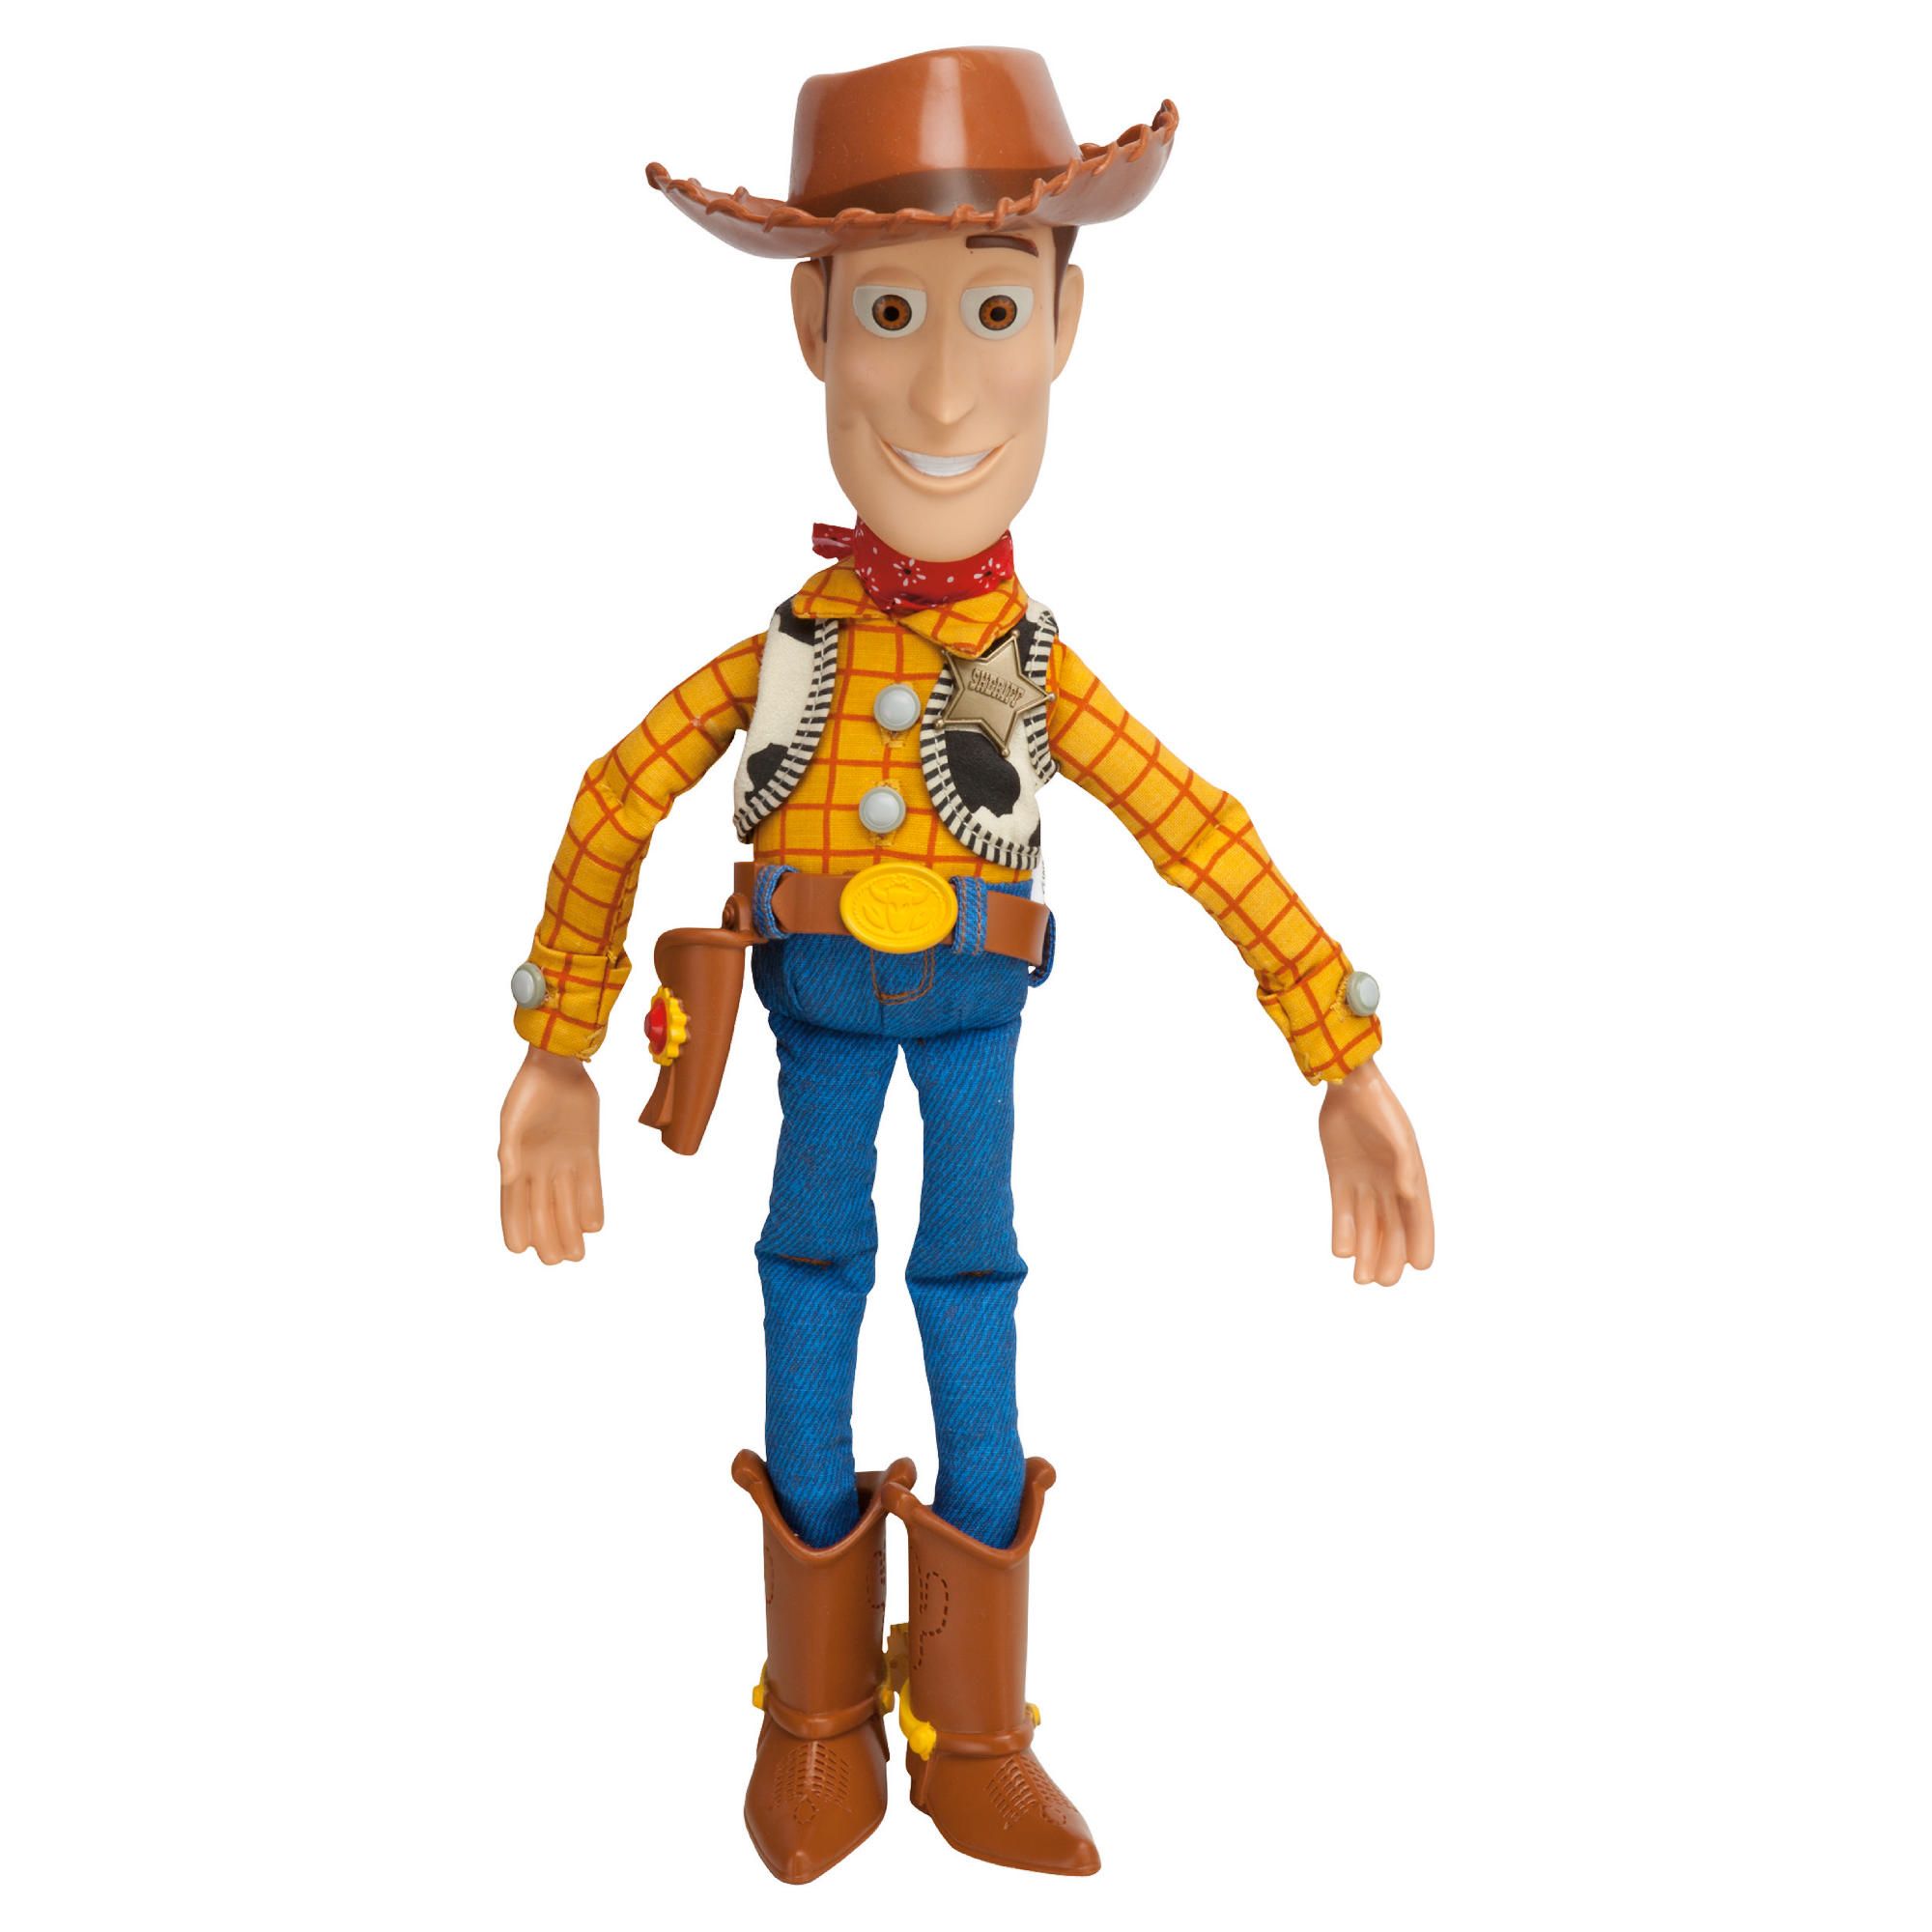 Woody toy story.